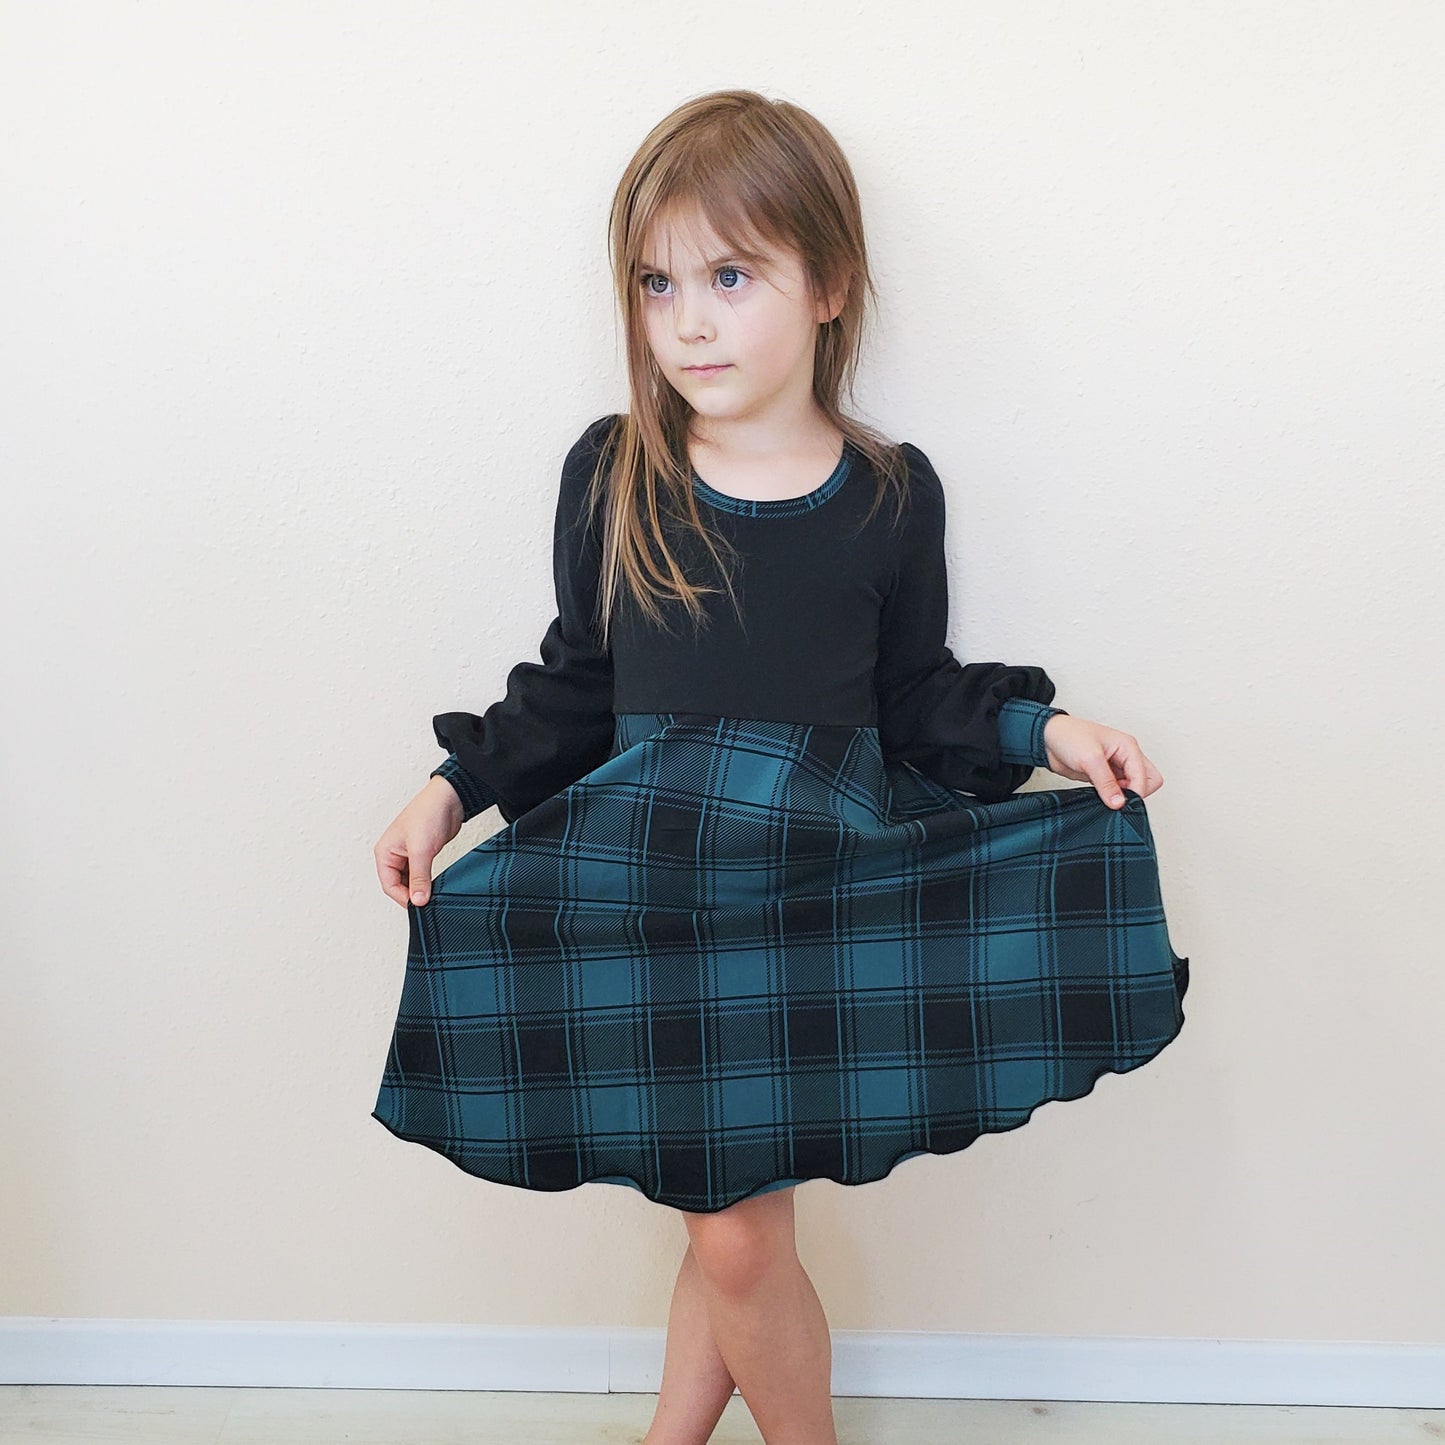 Girl's Dresses in Plaid with Twirly Skirt